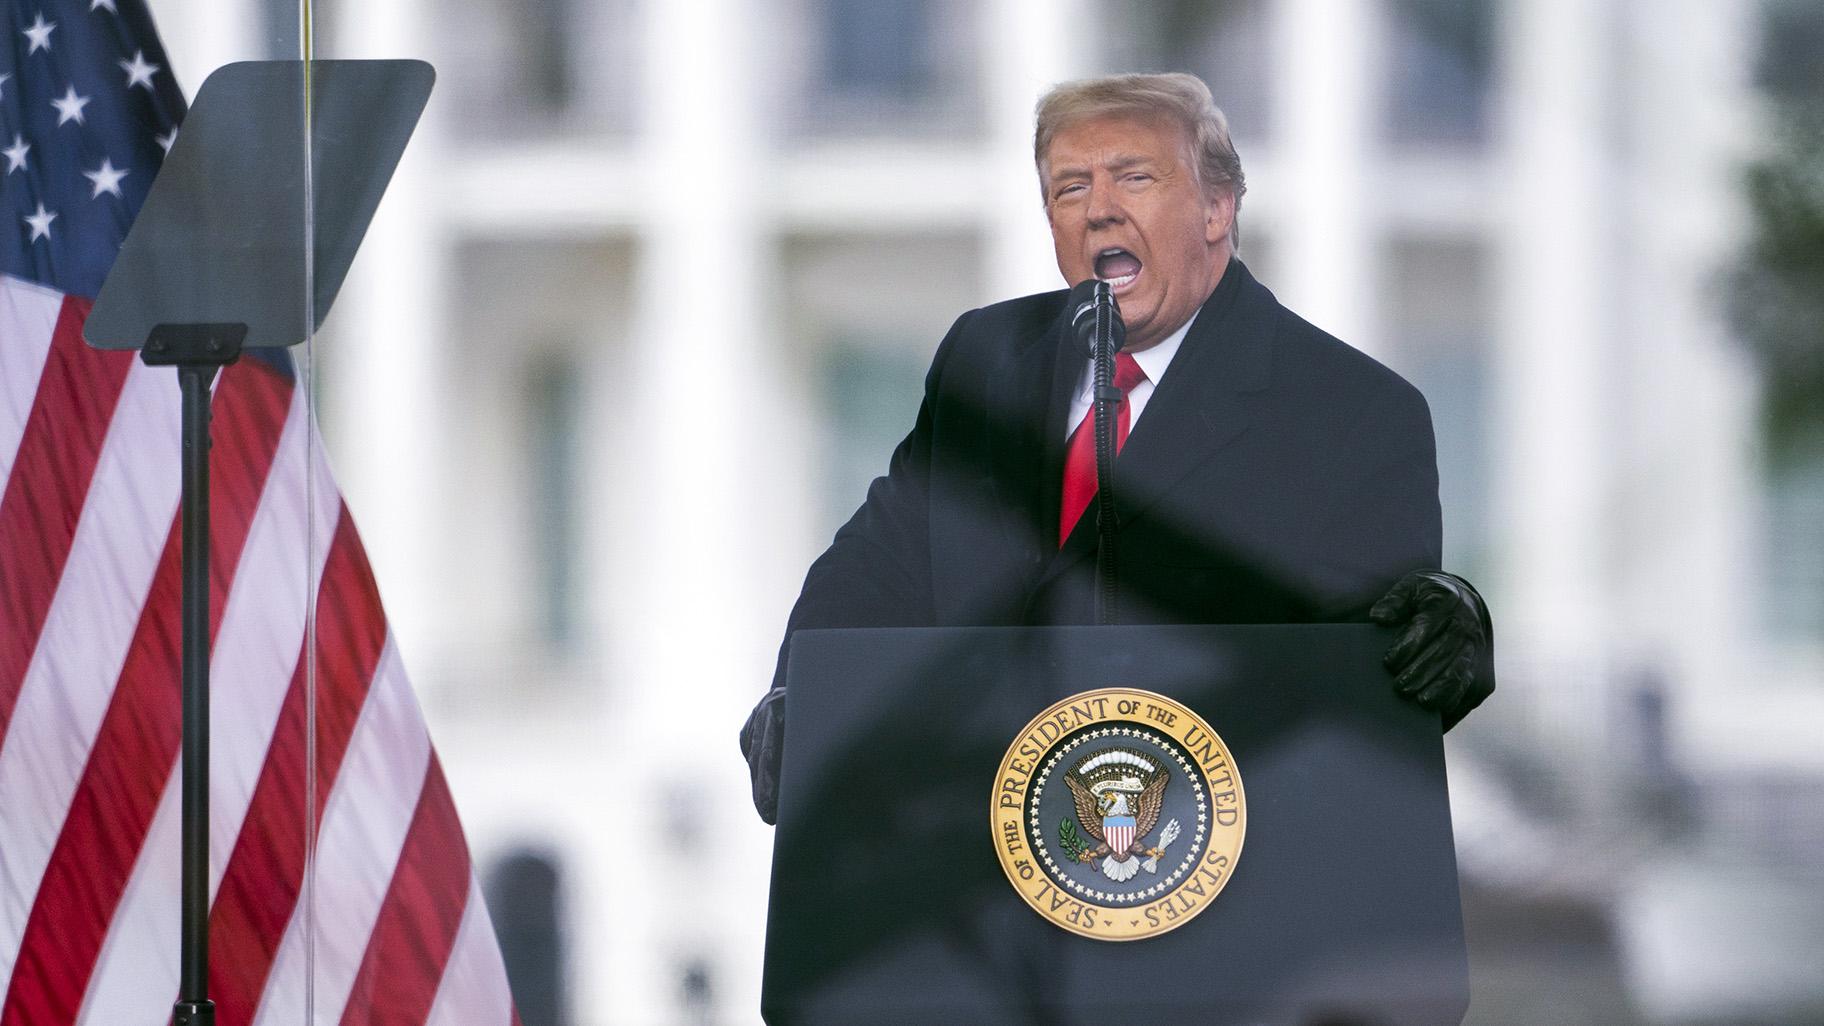 In this Jan. 6, 2021, file photo, President Donald Trump speaks during a rally protesting the electoral college certification of Joe Biden as President in Washington. (AP Photo / Evan Vucci, File)